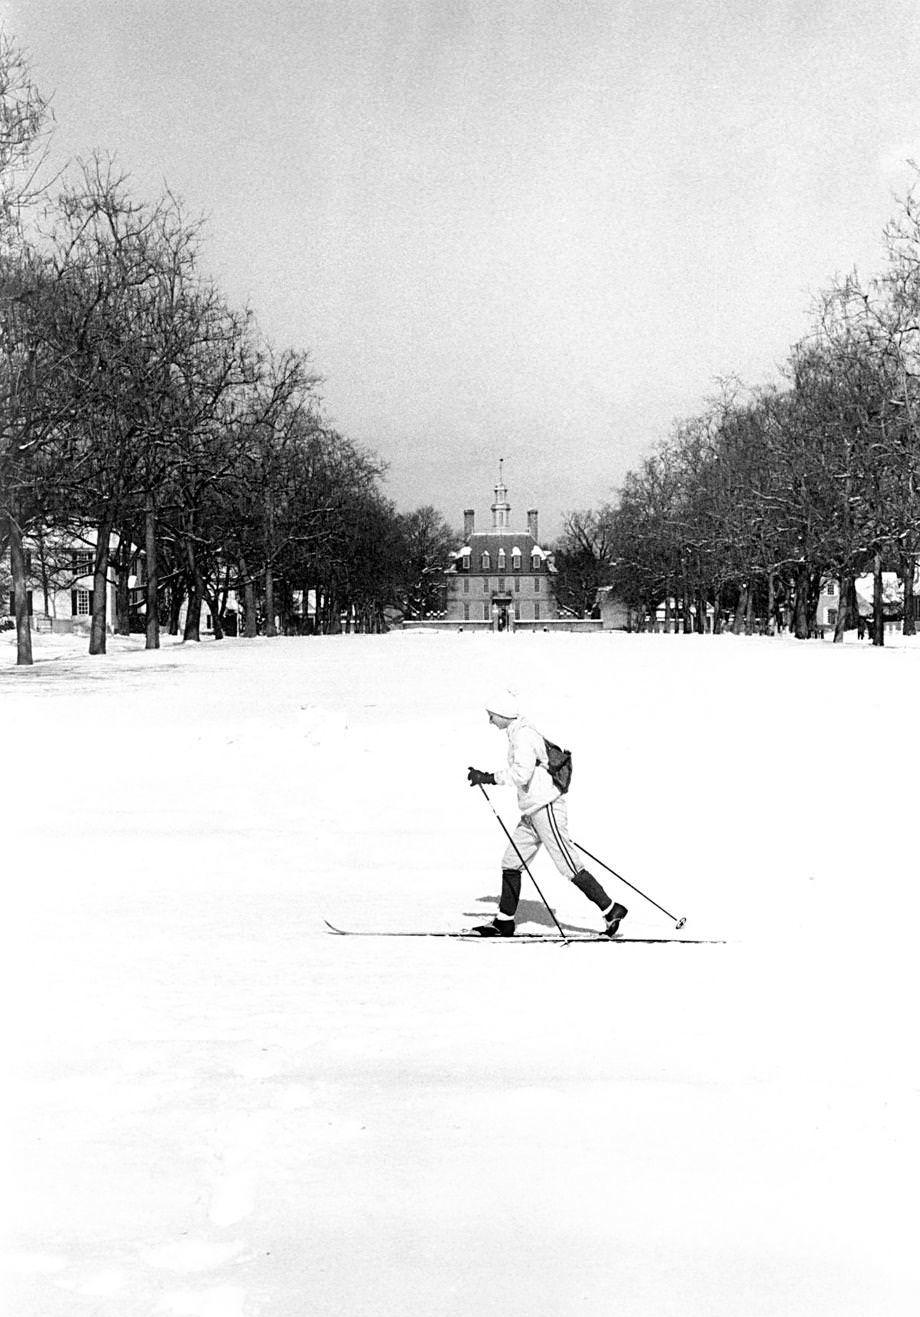 Constance Ramsey, a former Richmond resident and a College of William & Mary graduate, traveled around Williamsburg on skis after a snowstorm, 1979.